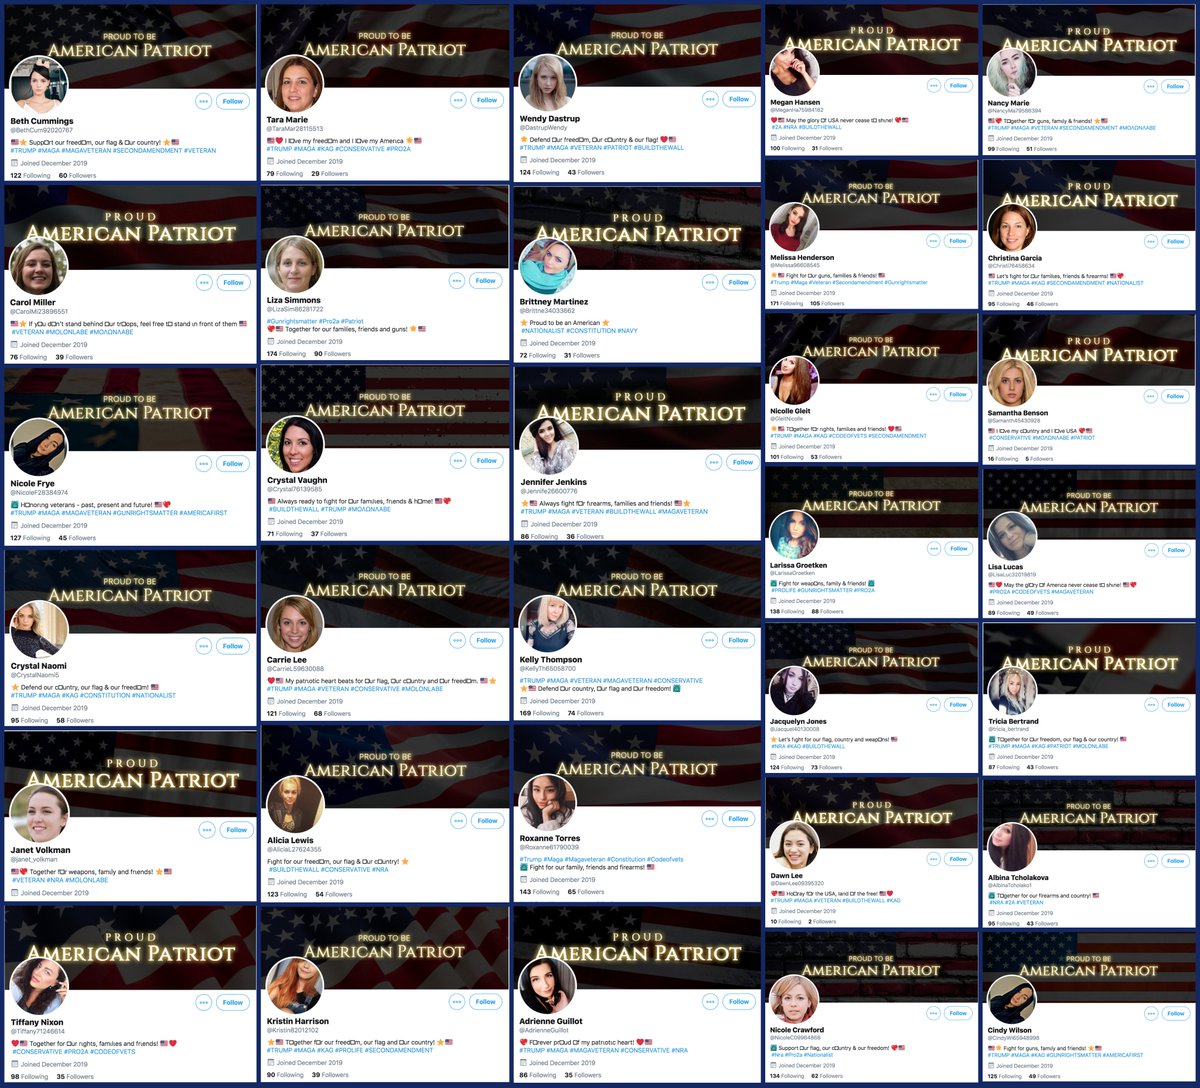 Update: the 20 accounts described in this thread have all been banned, but a new (and evolved) batch has arisen to take their place. By exploring the followers of accounts listed in  #MAGA train tweets, we found 32 accounts, all created Dec 14th or later. We may have missed some.